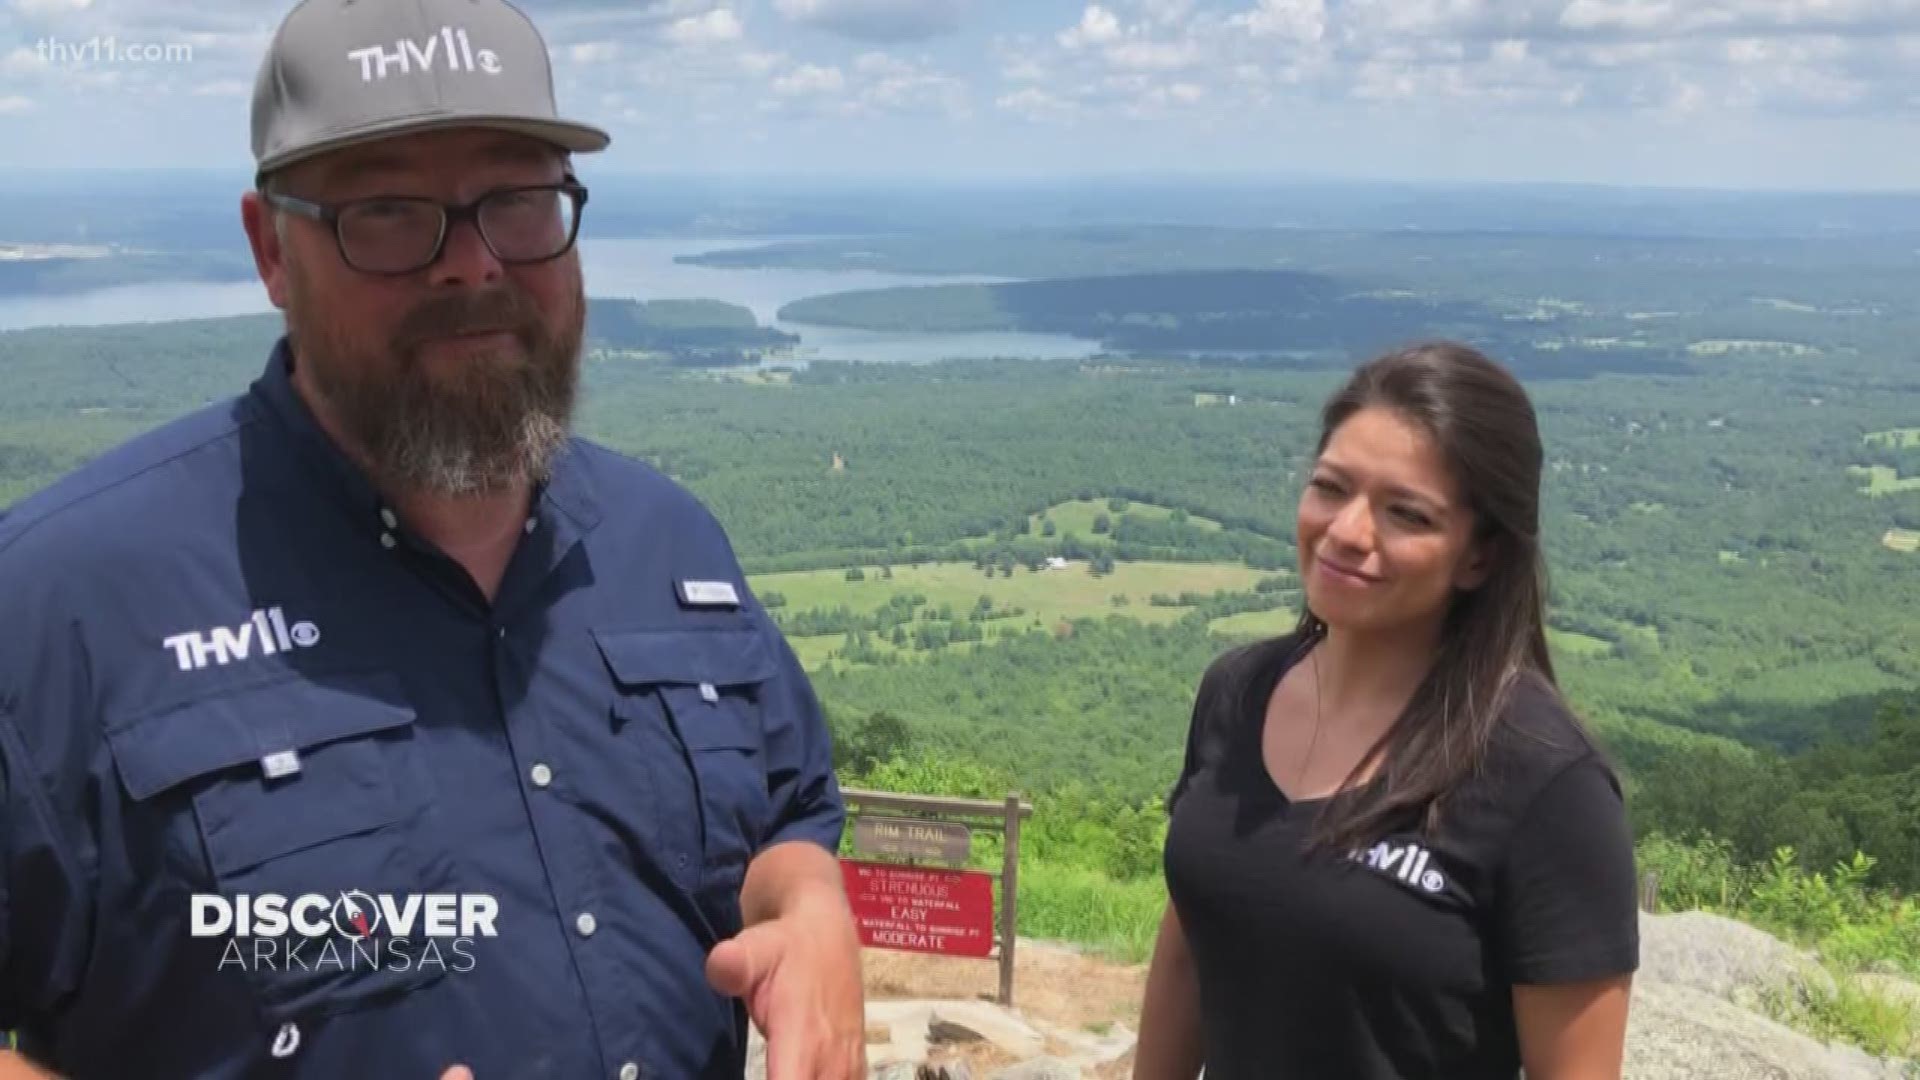 You may remember the Discover Arkansas team's first trip to Mt. Nebo. It was rainy, foggy and not the best day to see everything the area has to offer. So, we thought we'd go back and try again.